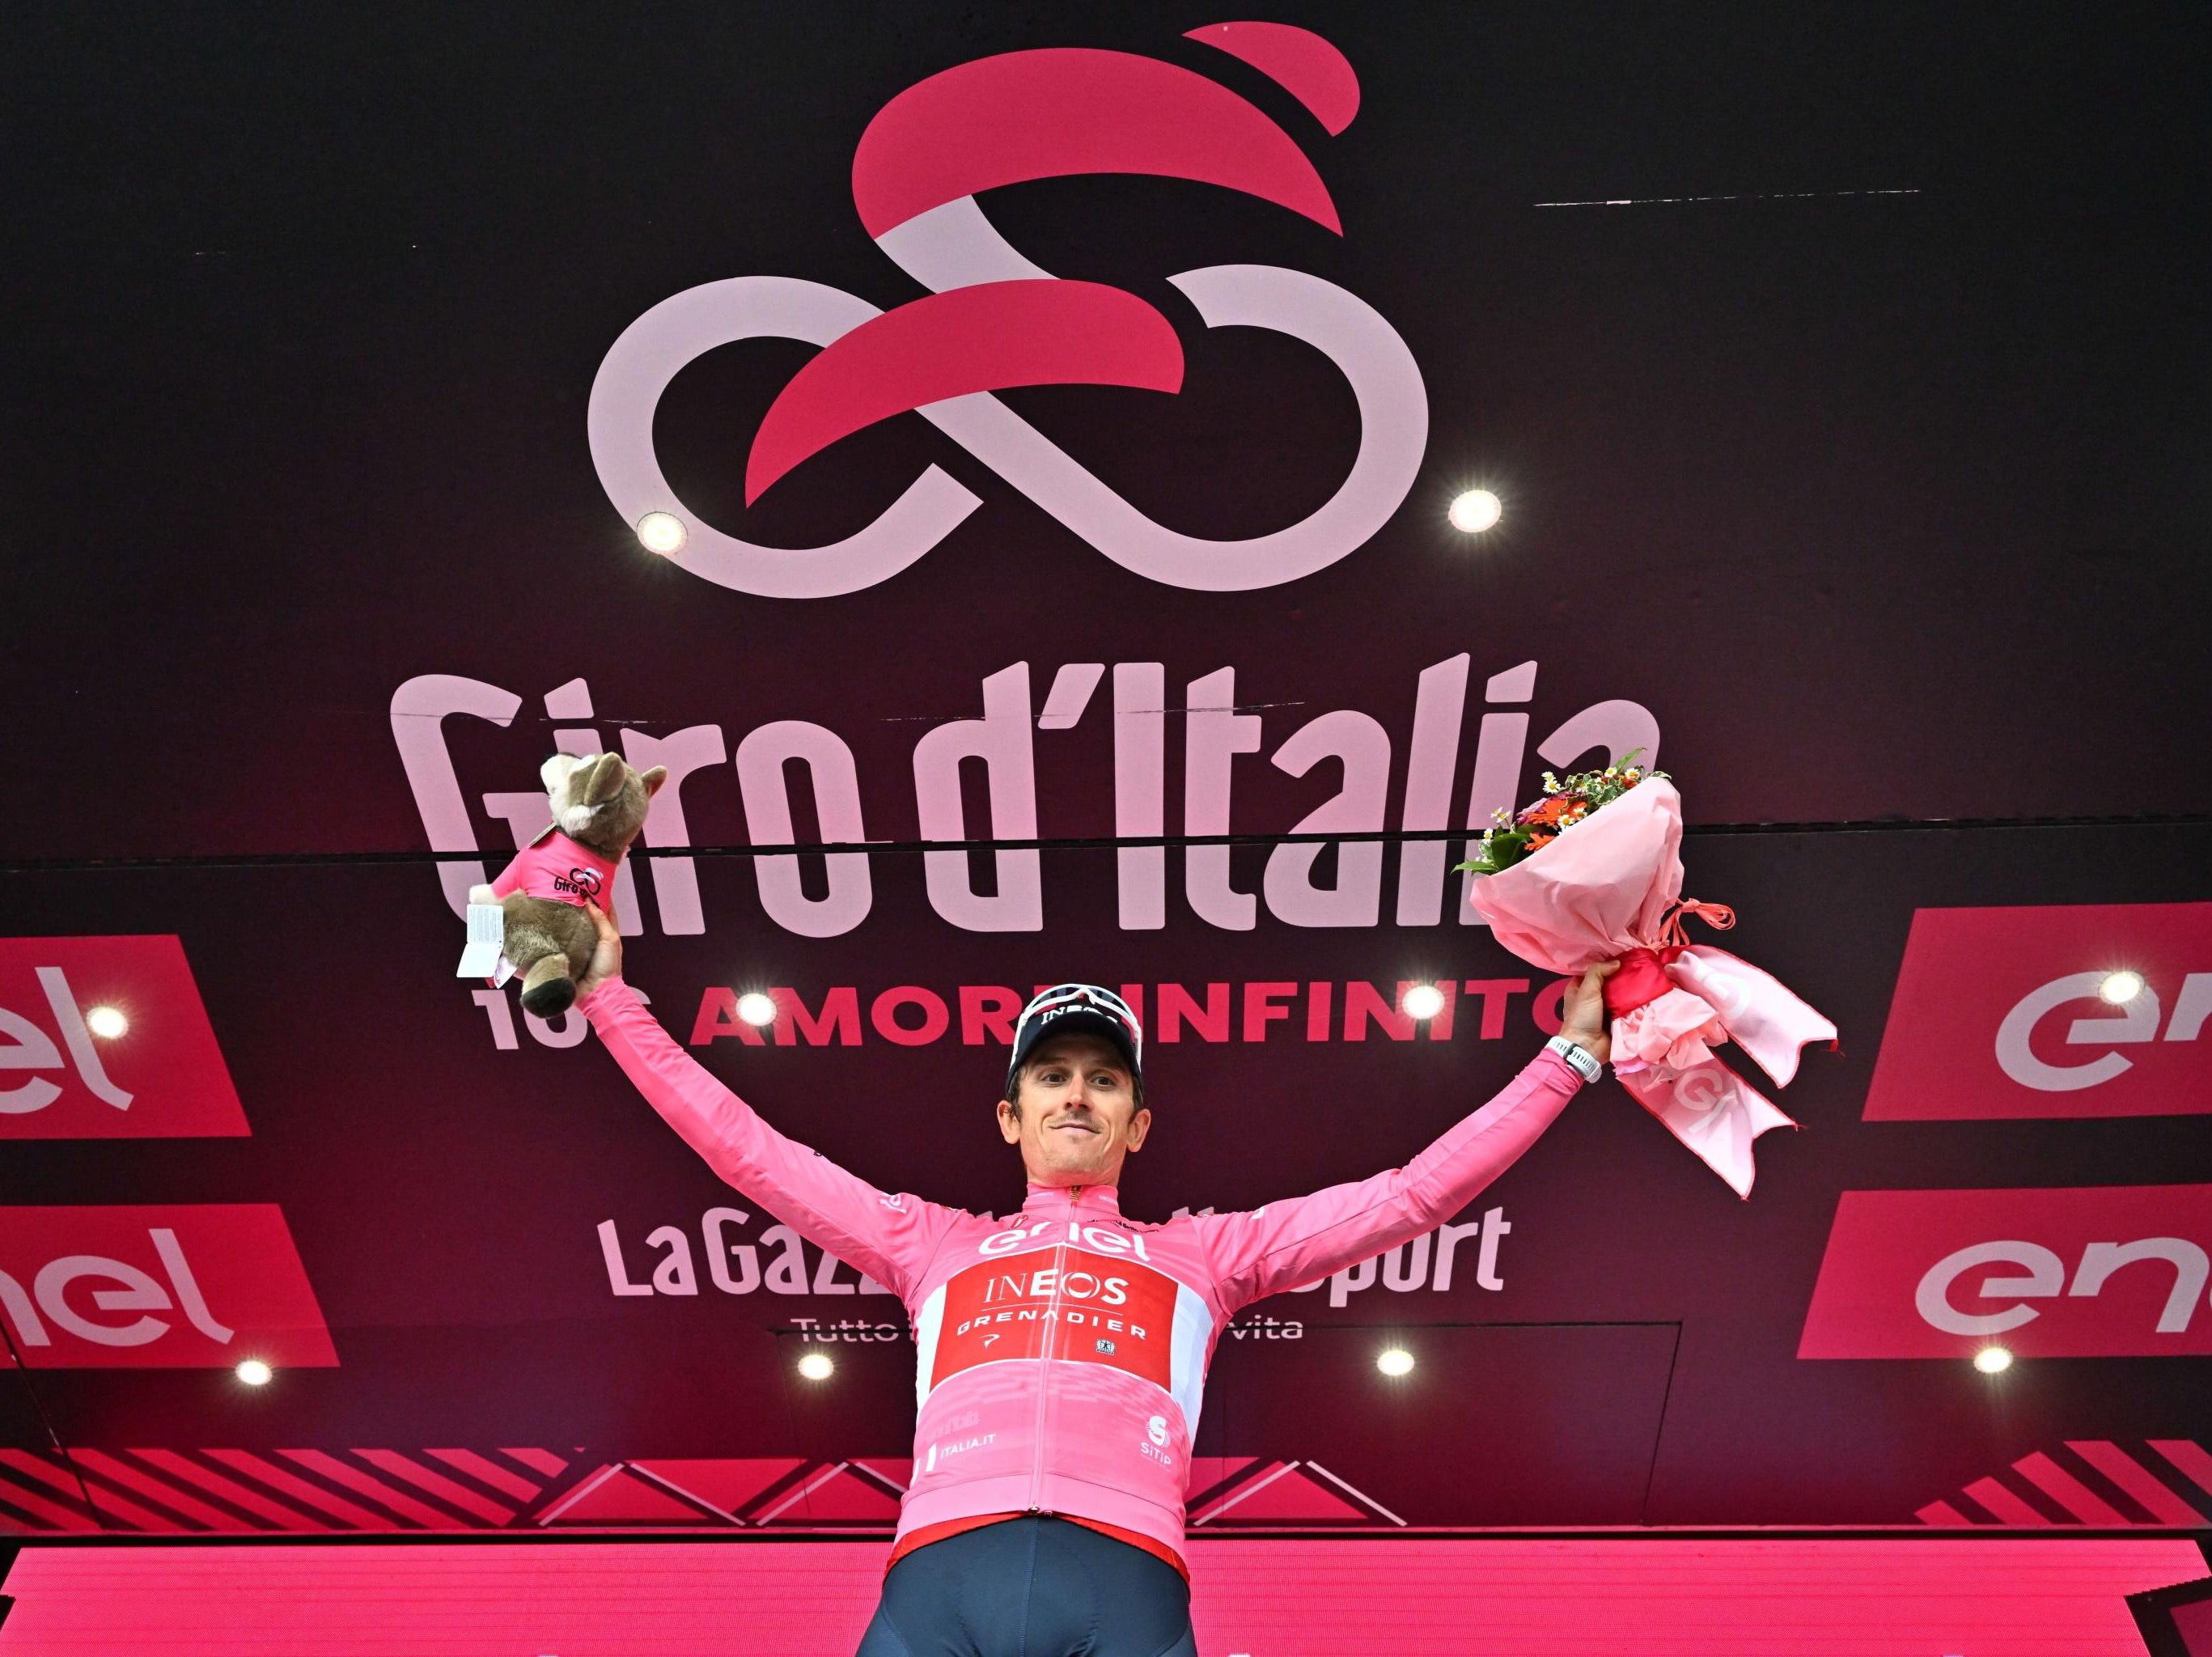 Geraint Thomas is hoping to secure a first overall Giro d’Italia victory